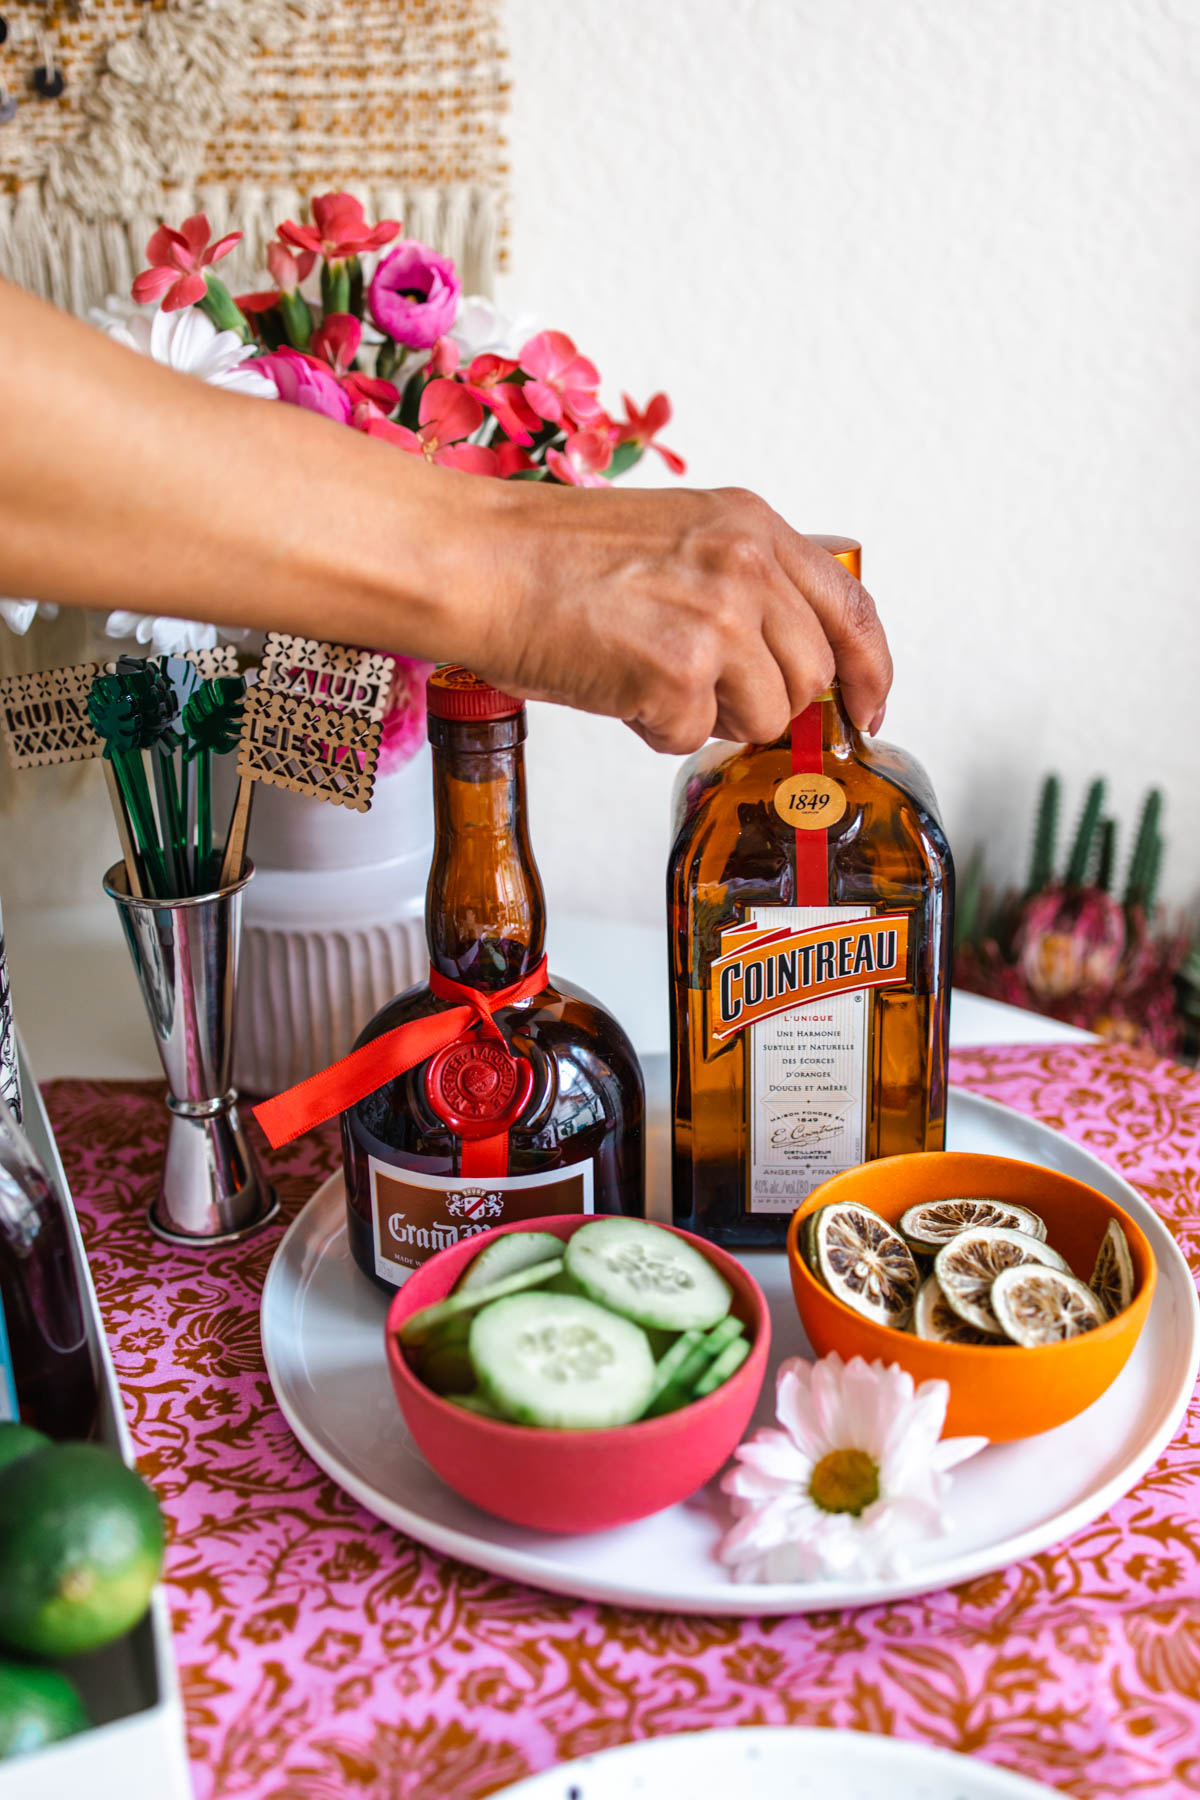 A person holding the top portion of a Cointreau bottle beside a bottle of Grand Marnier behind bowls of dried lime wheels and cucumber slices.